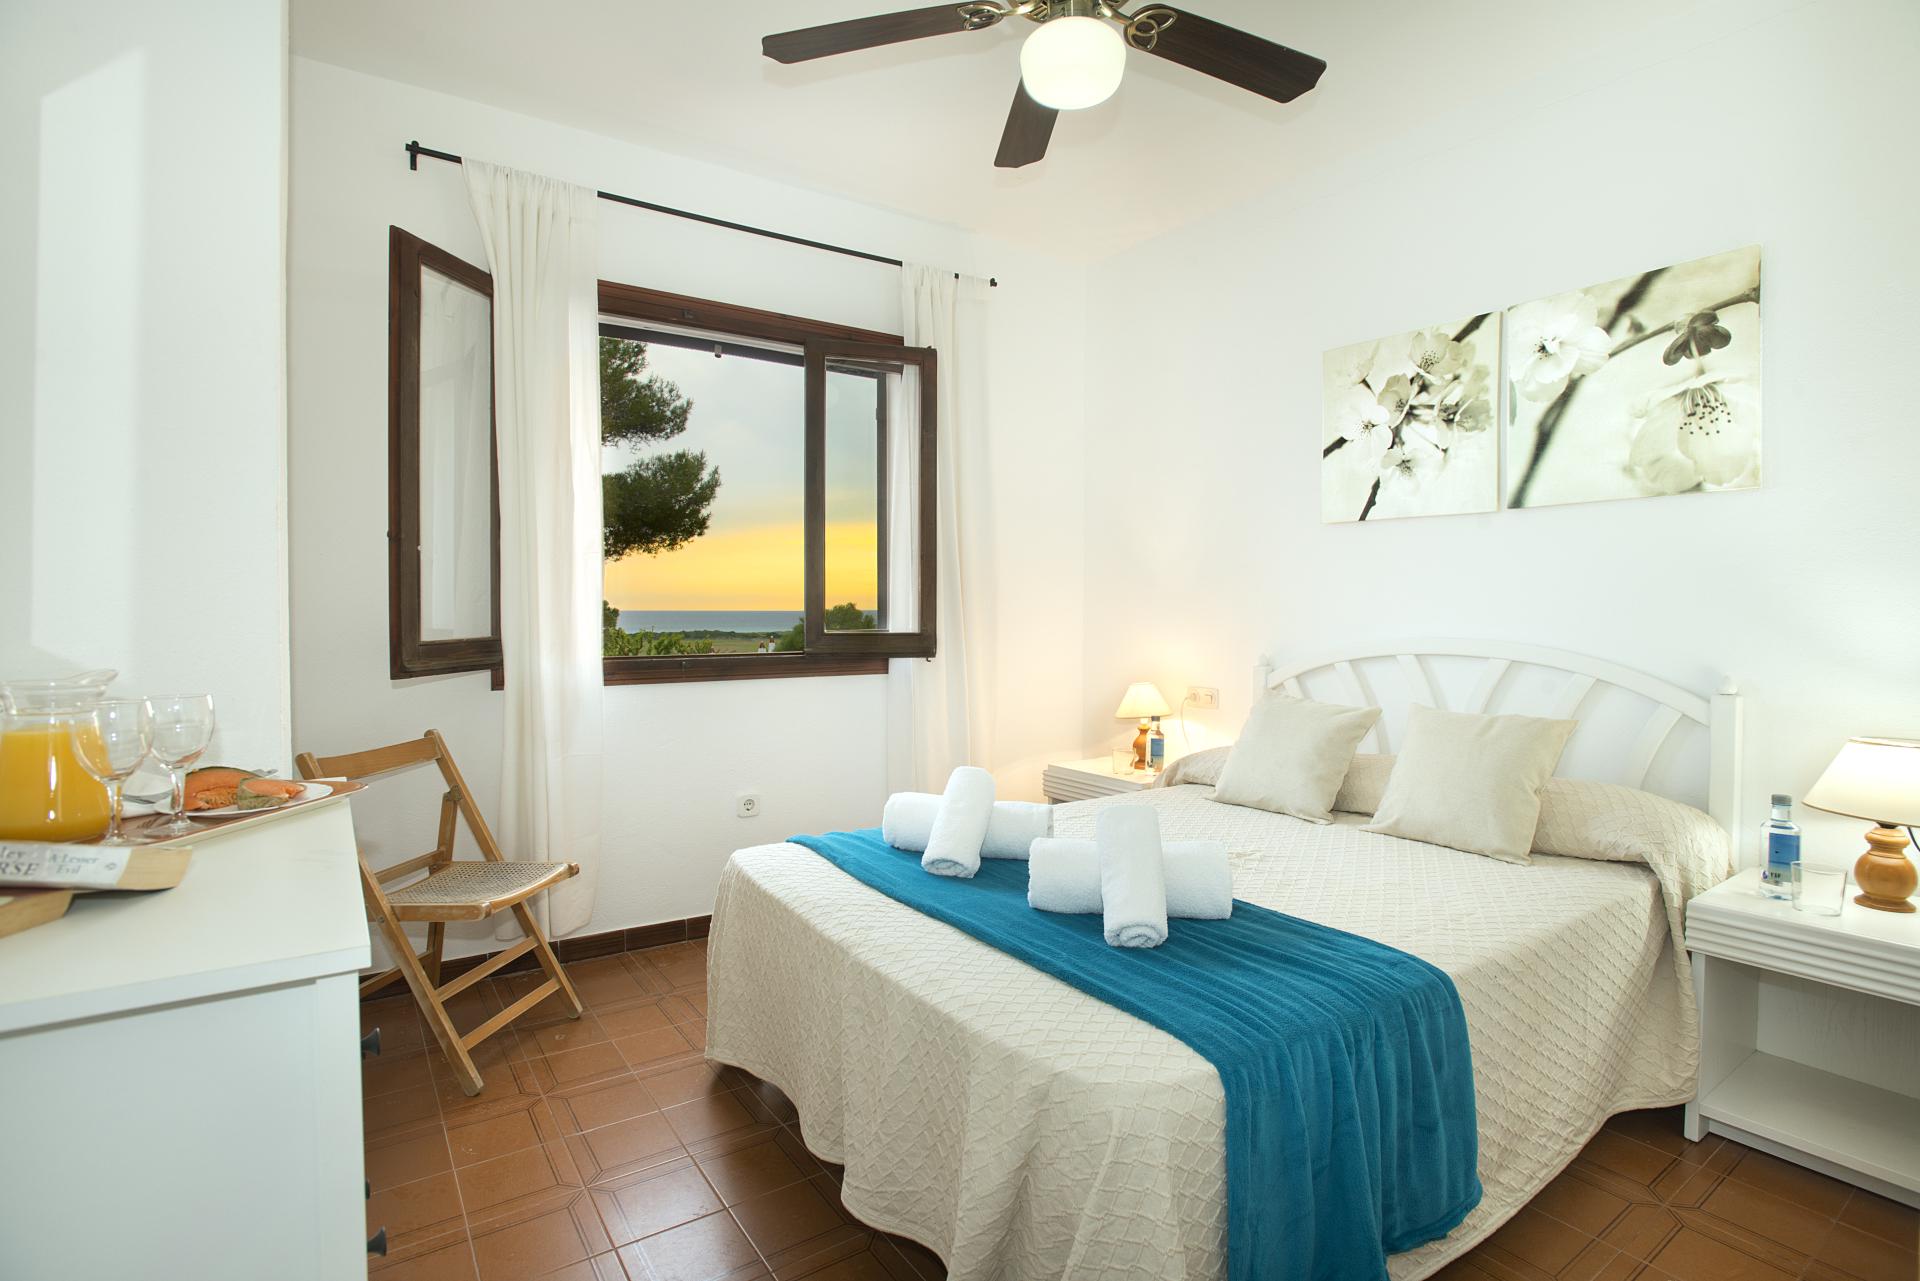 Experience the best of all worlds Menorca has to offer at the stunning Casa Maria Jesus